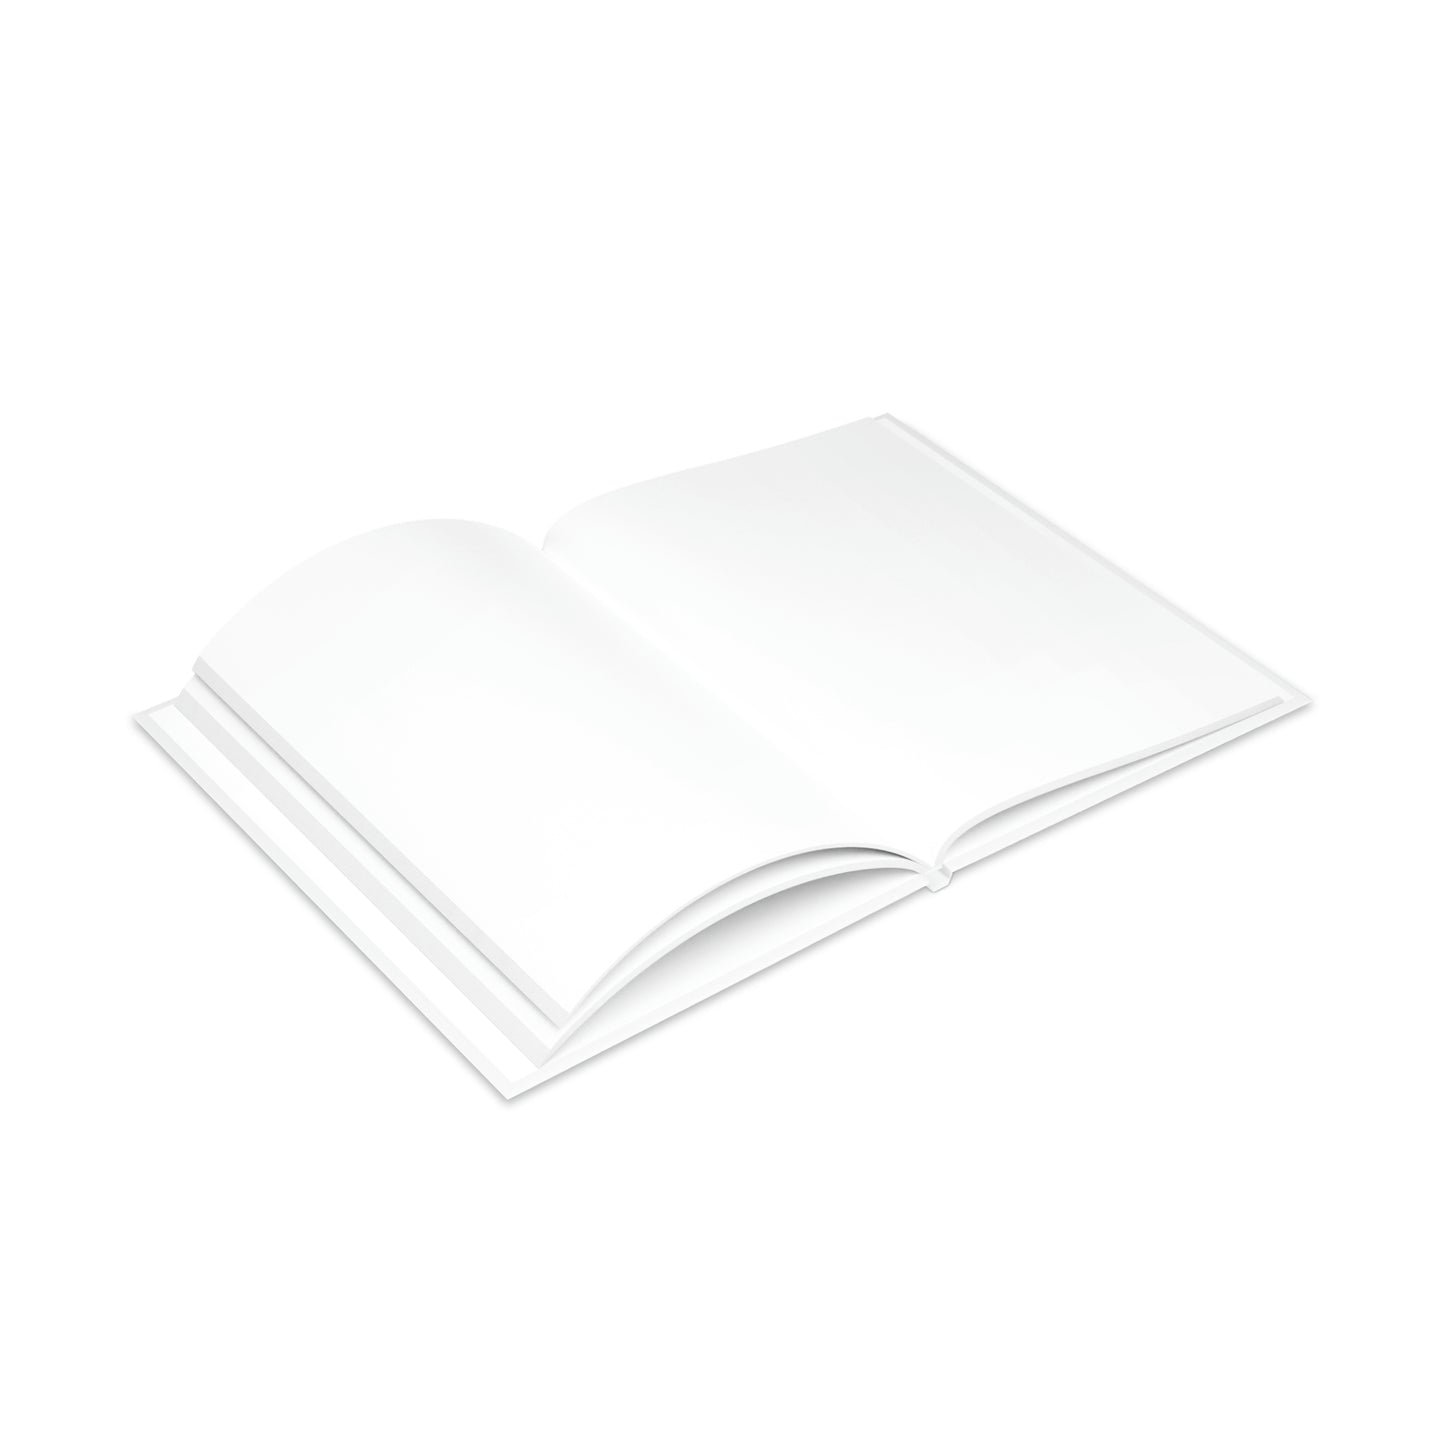 Don't Quit - Hardcover Notebook with Puffy Covers